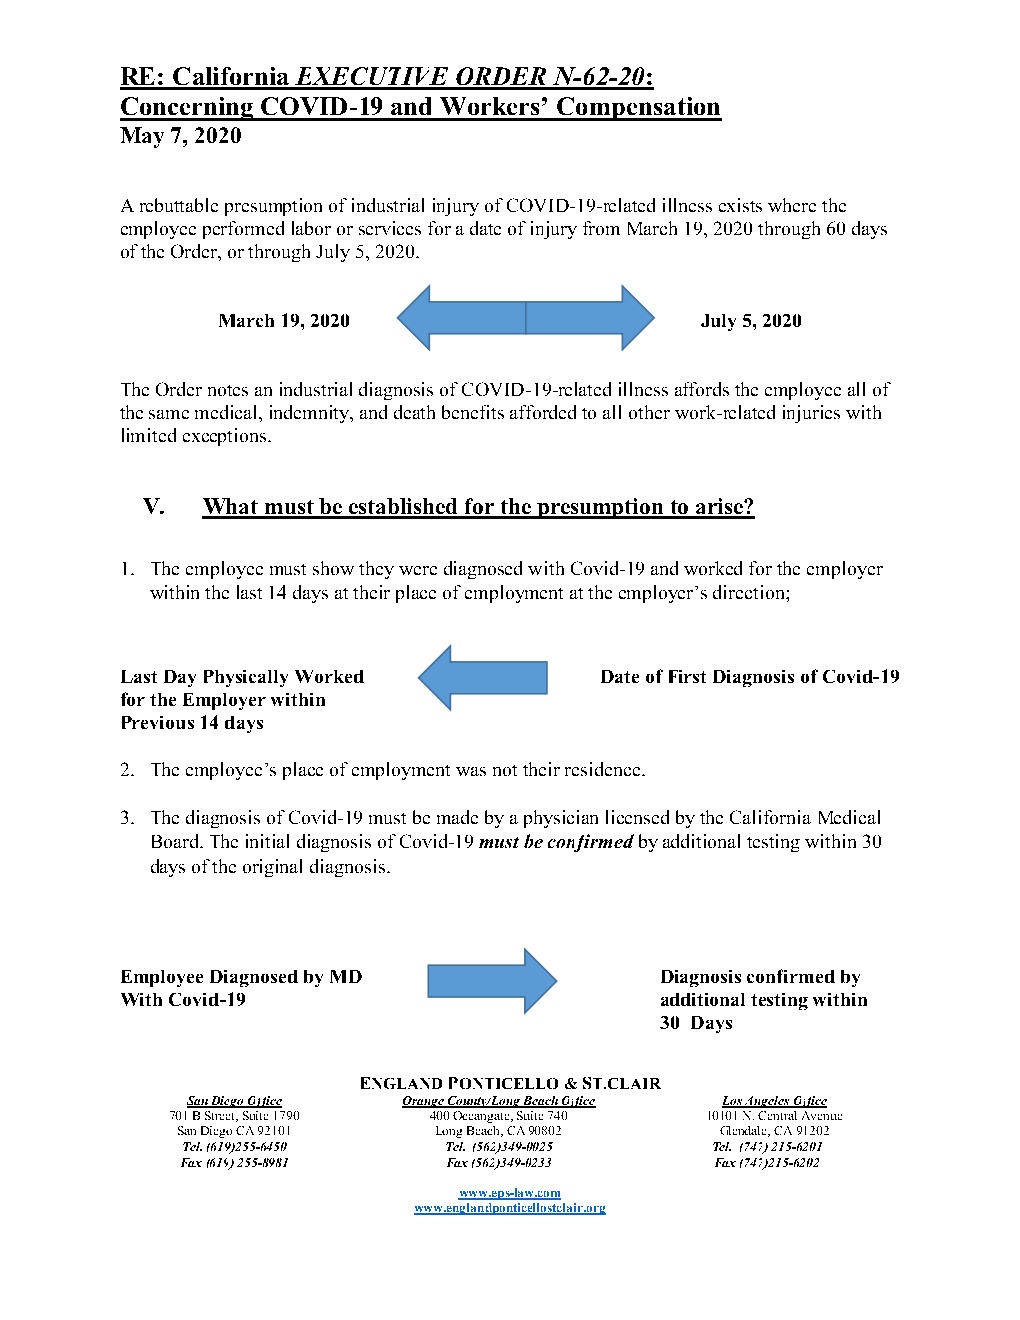 EPS Re Covid 19 Executive Order_Page3